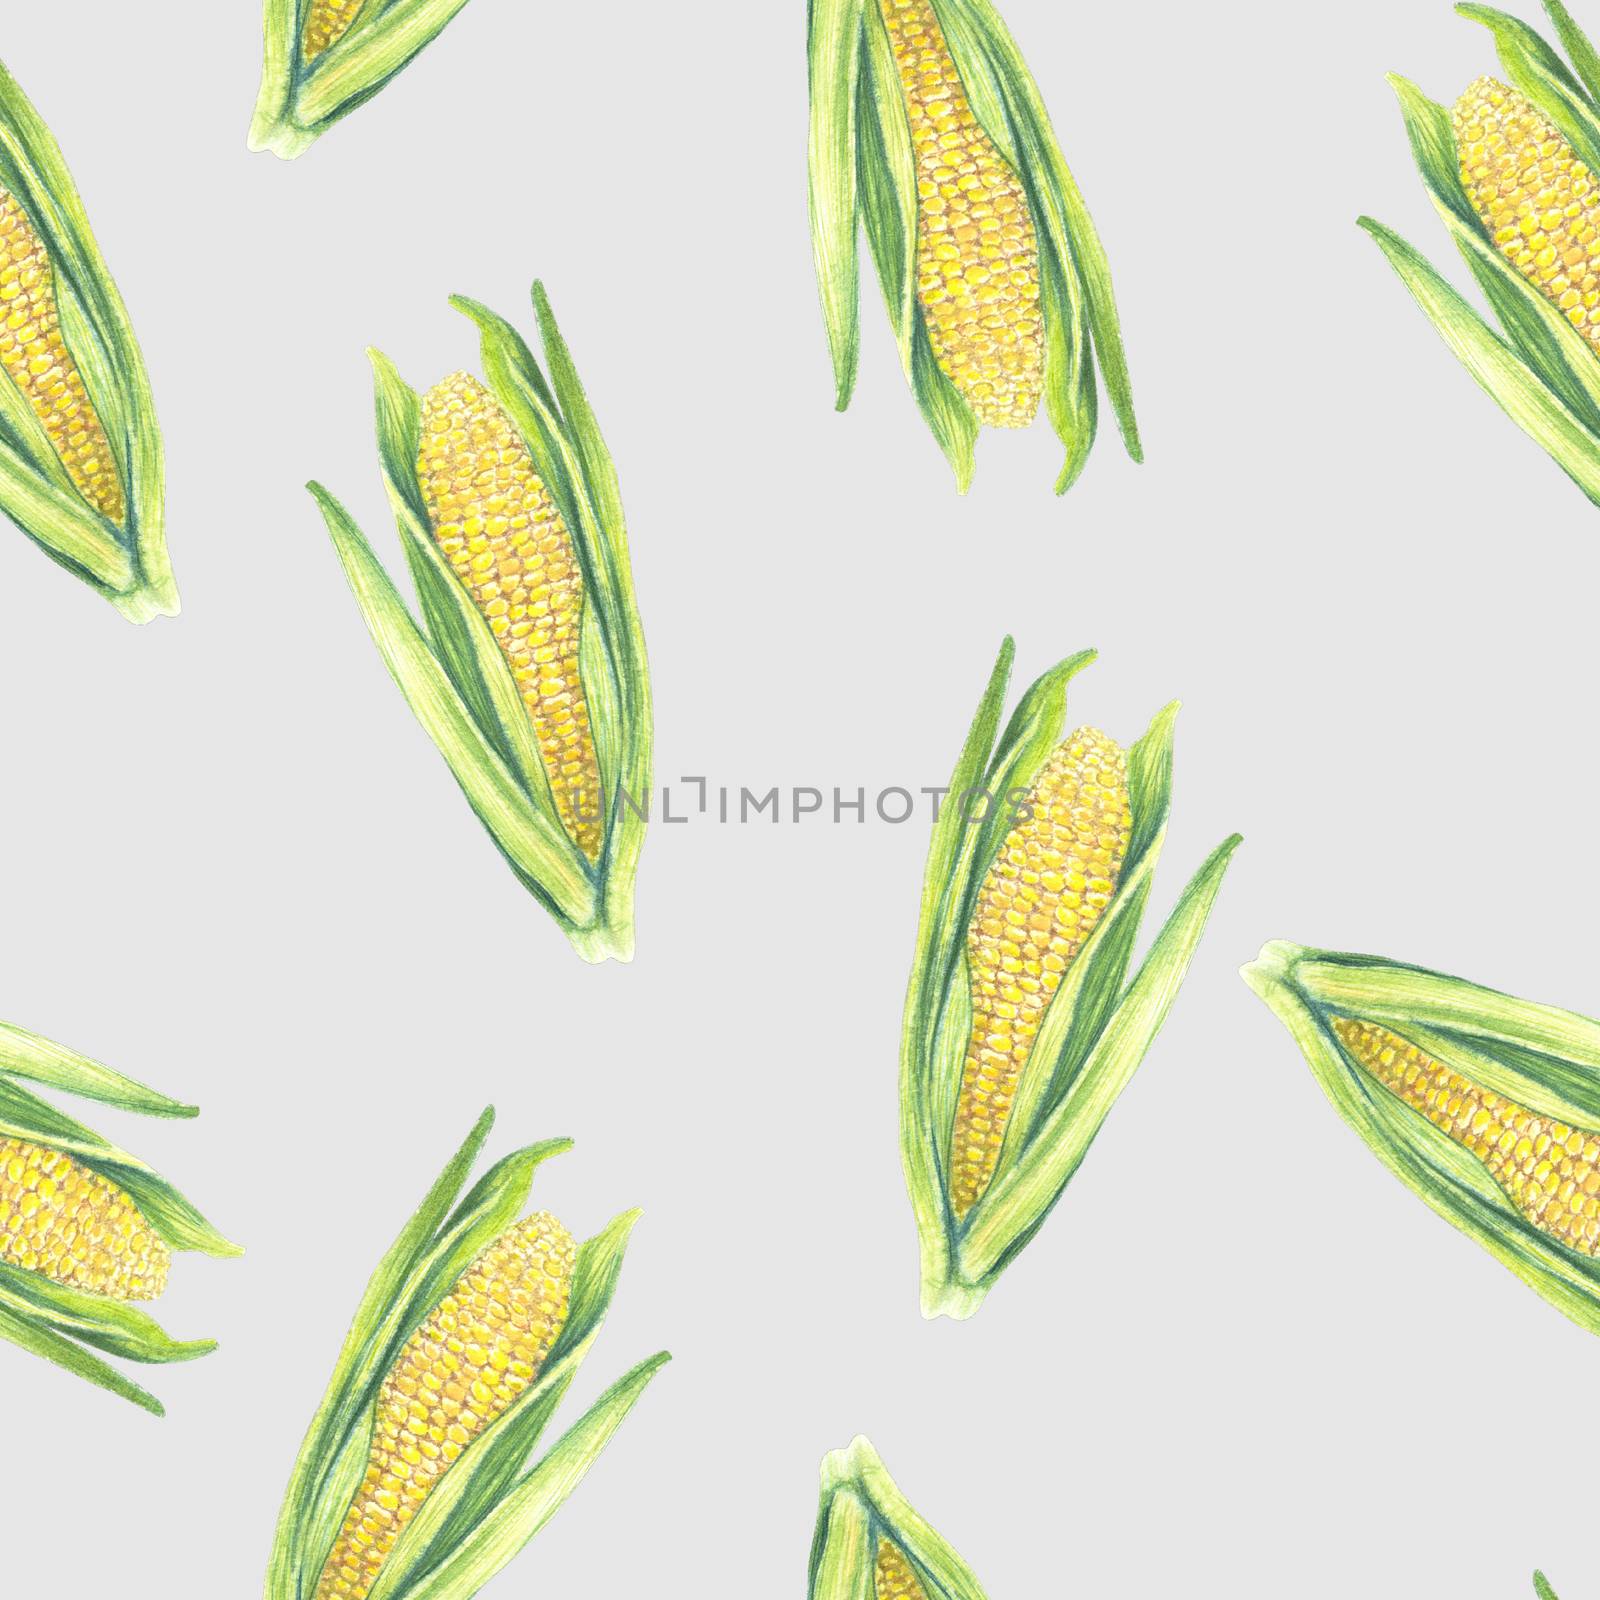 Seamless Pattern of corn cobs with leaves on grey background. Eco vegetables plants. Shop design, healthy lifestyle, packaging, textile. Hand drawn watercolour illustration. Botanical realistic art.